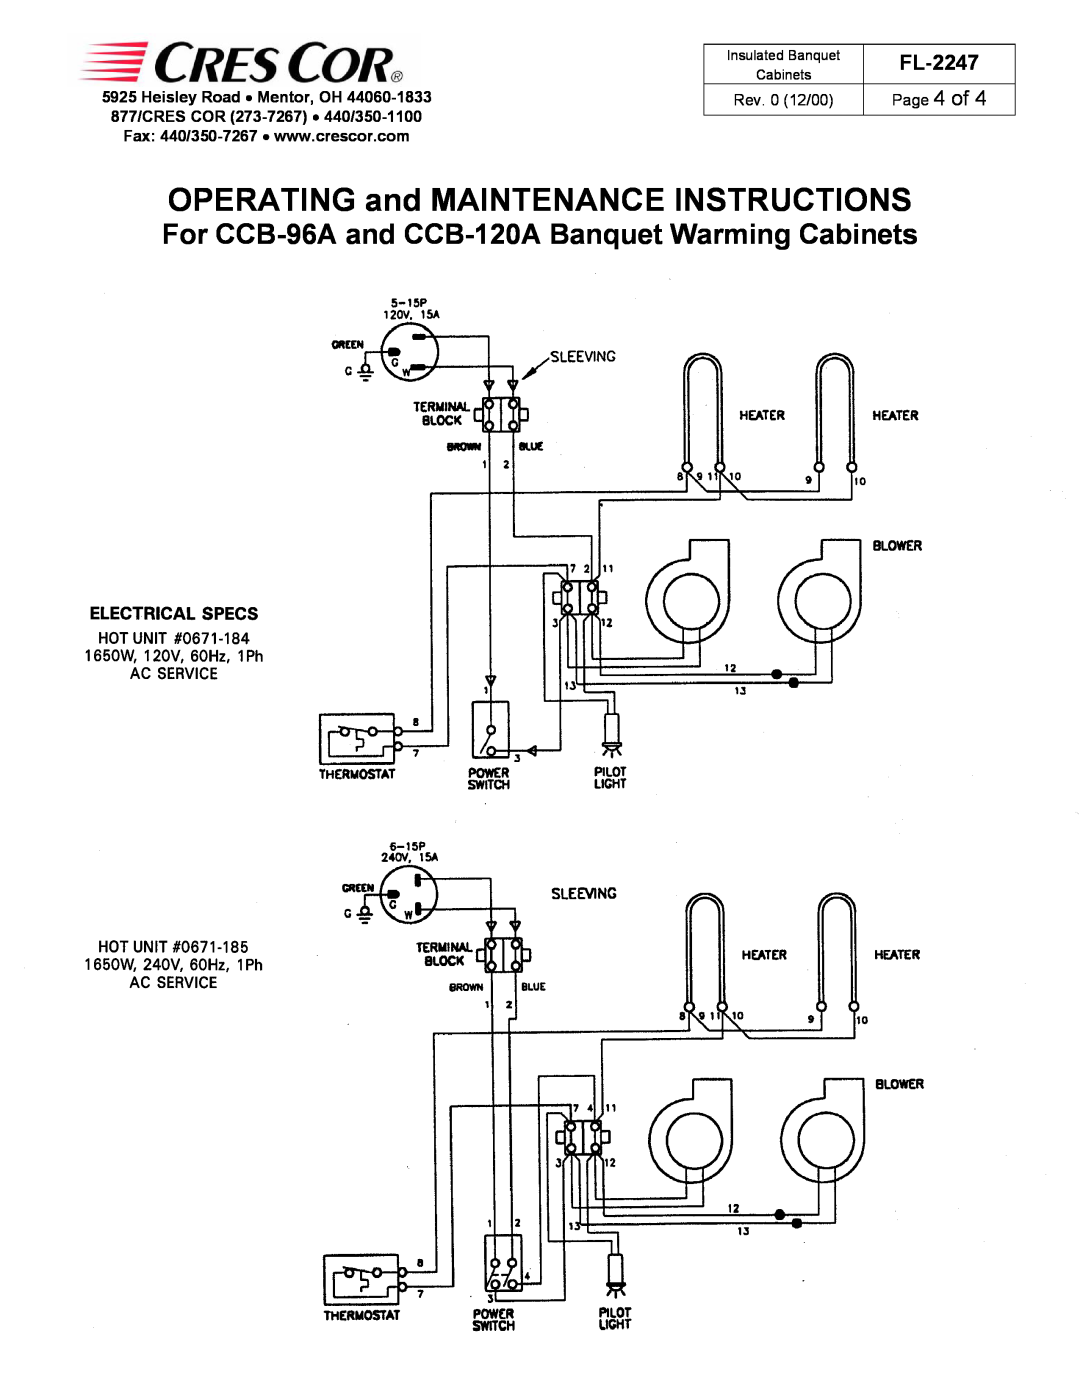 Cres Cor Page 4 of, OPERATING and MAINTENANCE INSTRUCTIONS, For CCB-96Aand CCB-120ABanquet Warming Cabinets, FL-2247 